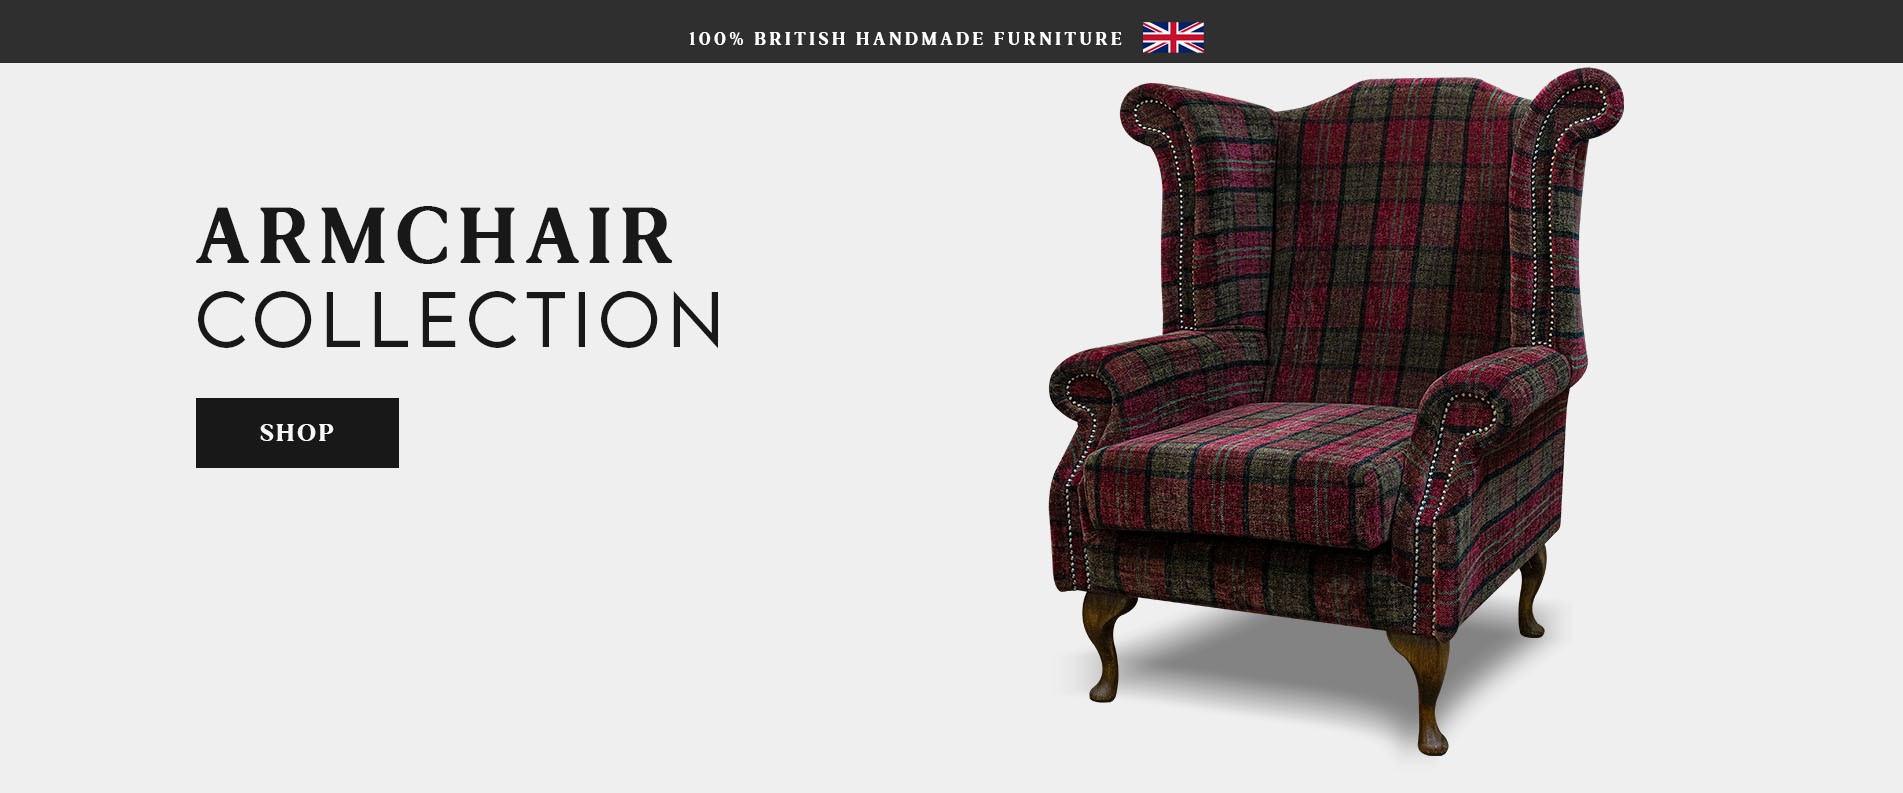 Wingback & Fireside Chairs